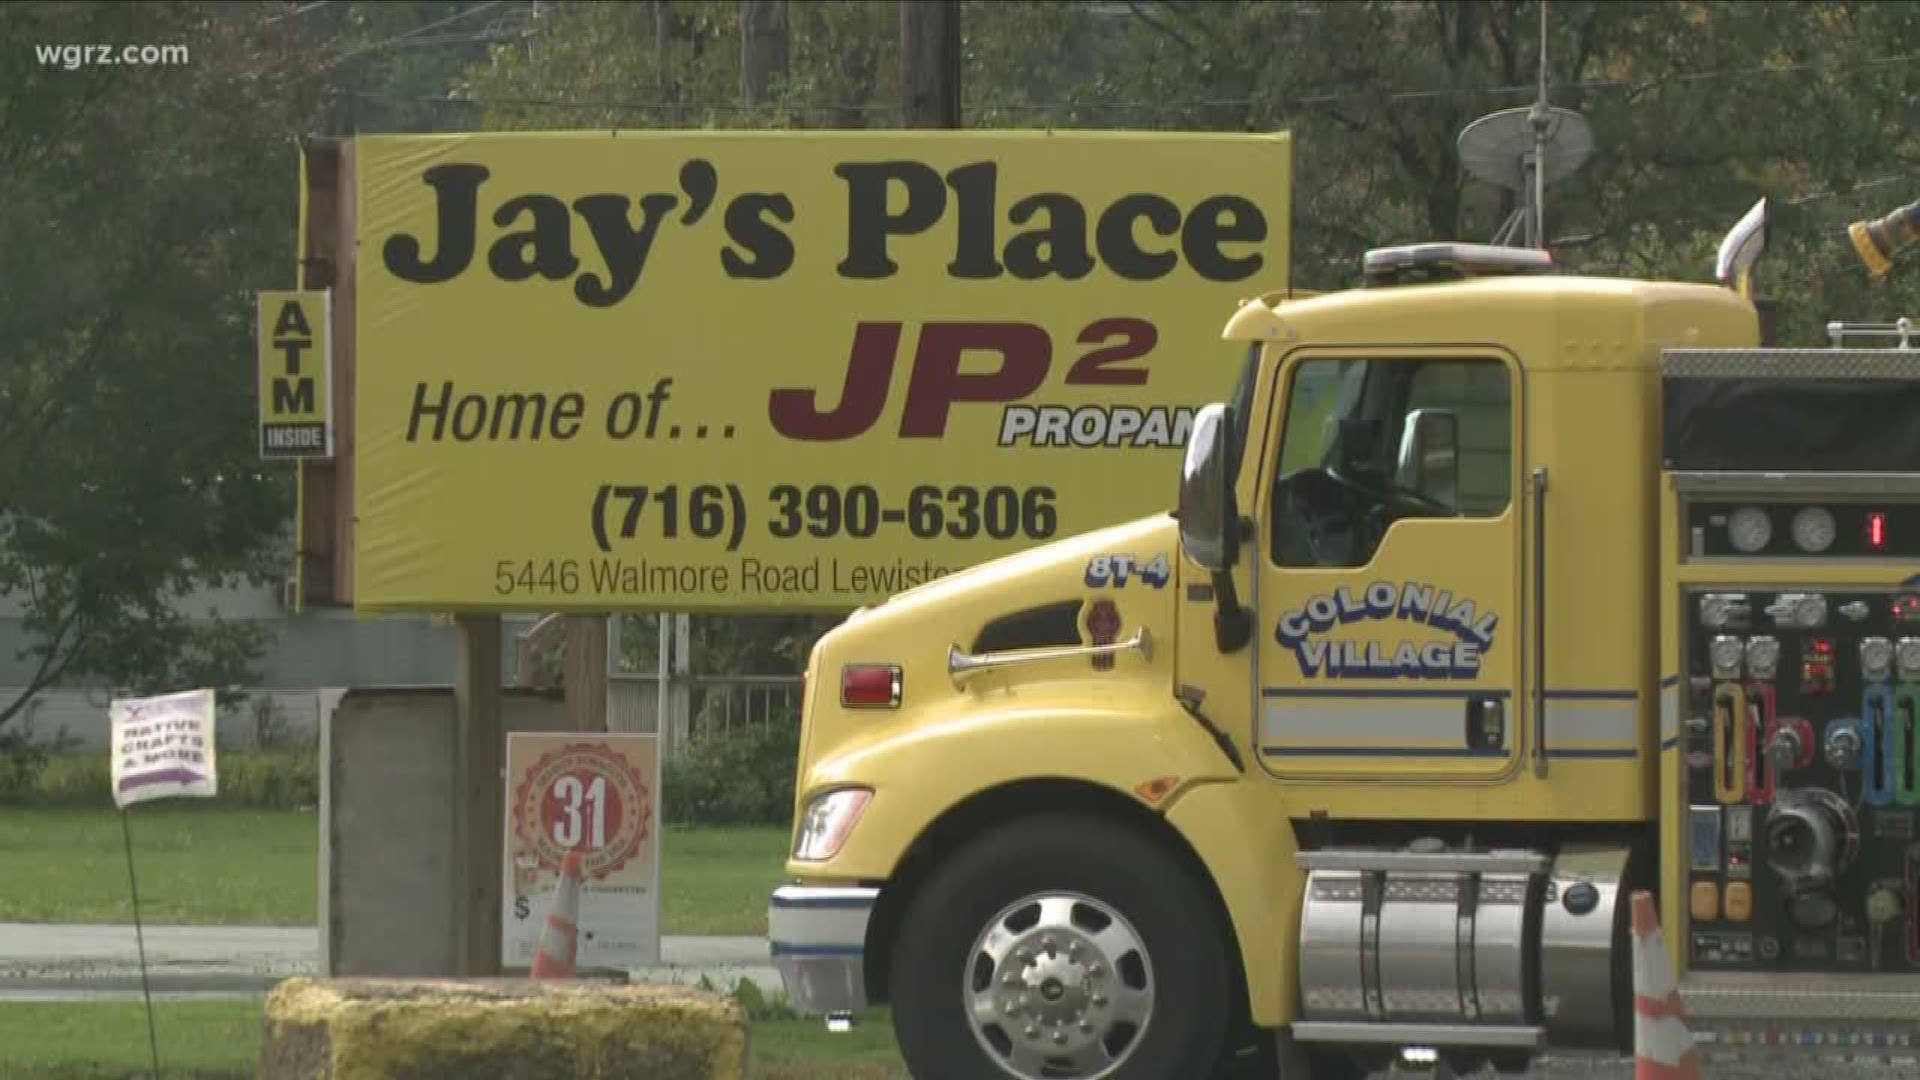 Leak Discovered By Workers At JP2 Propane